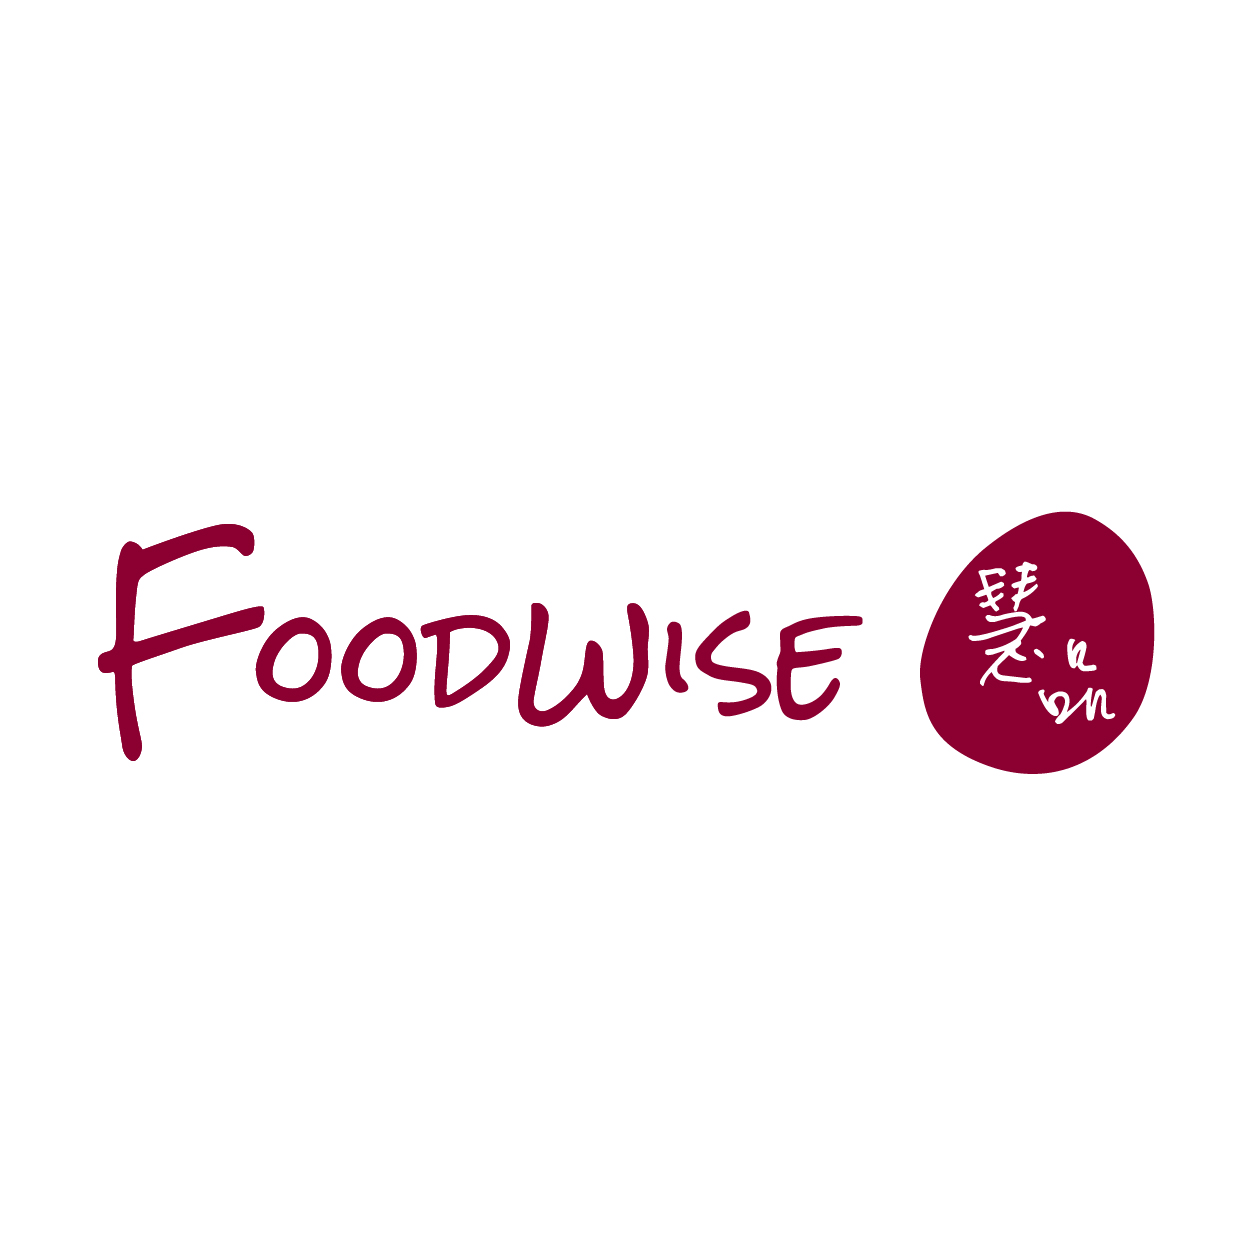 FOODWISE (temporarily closed)